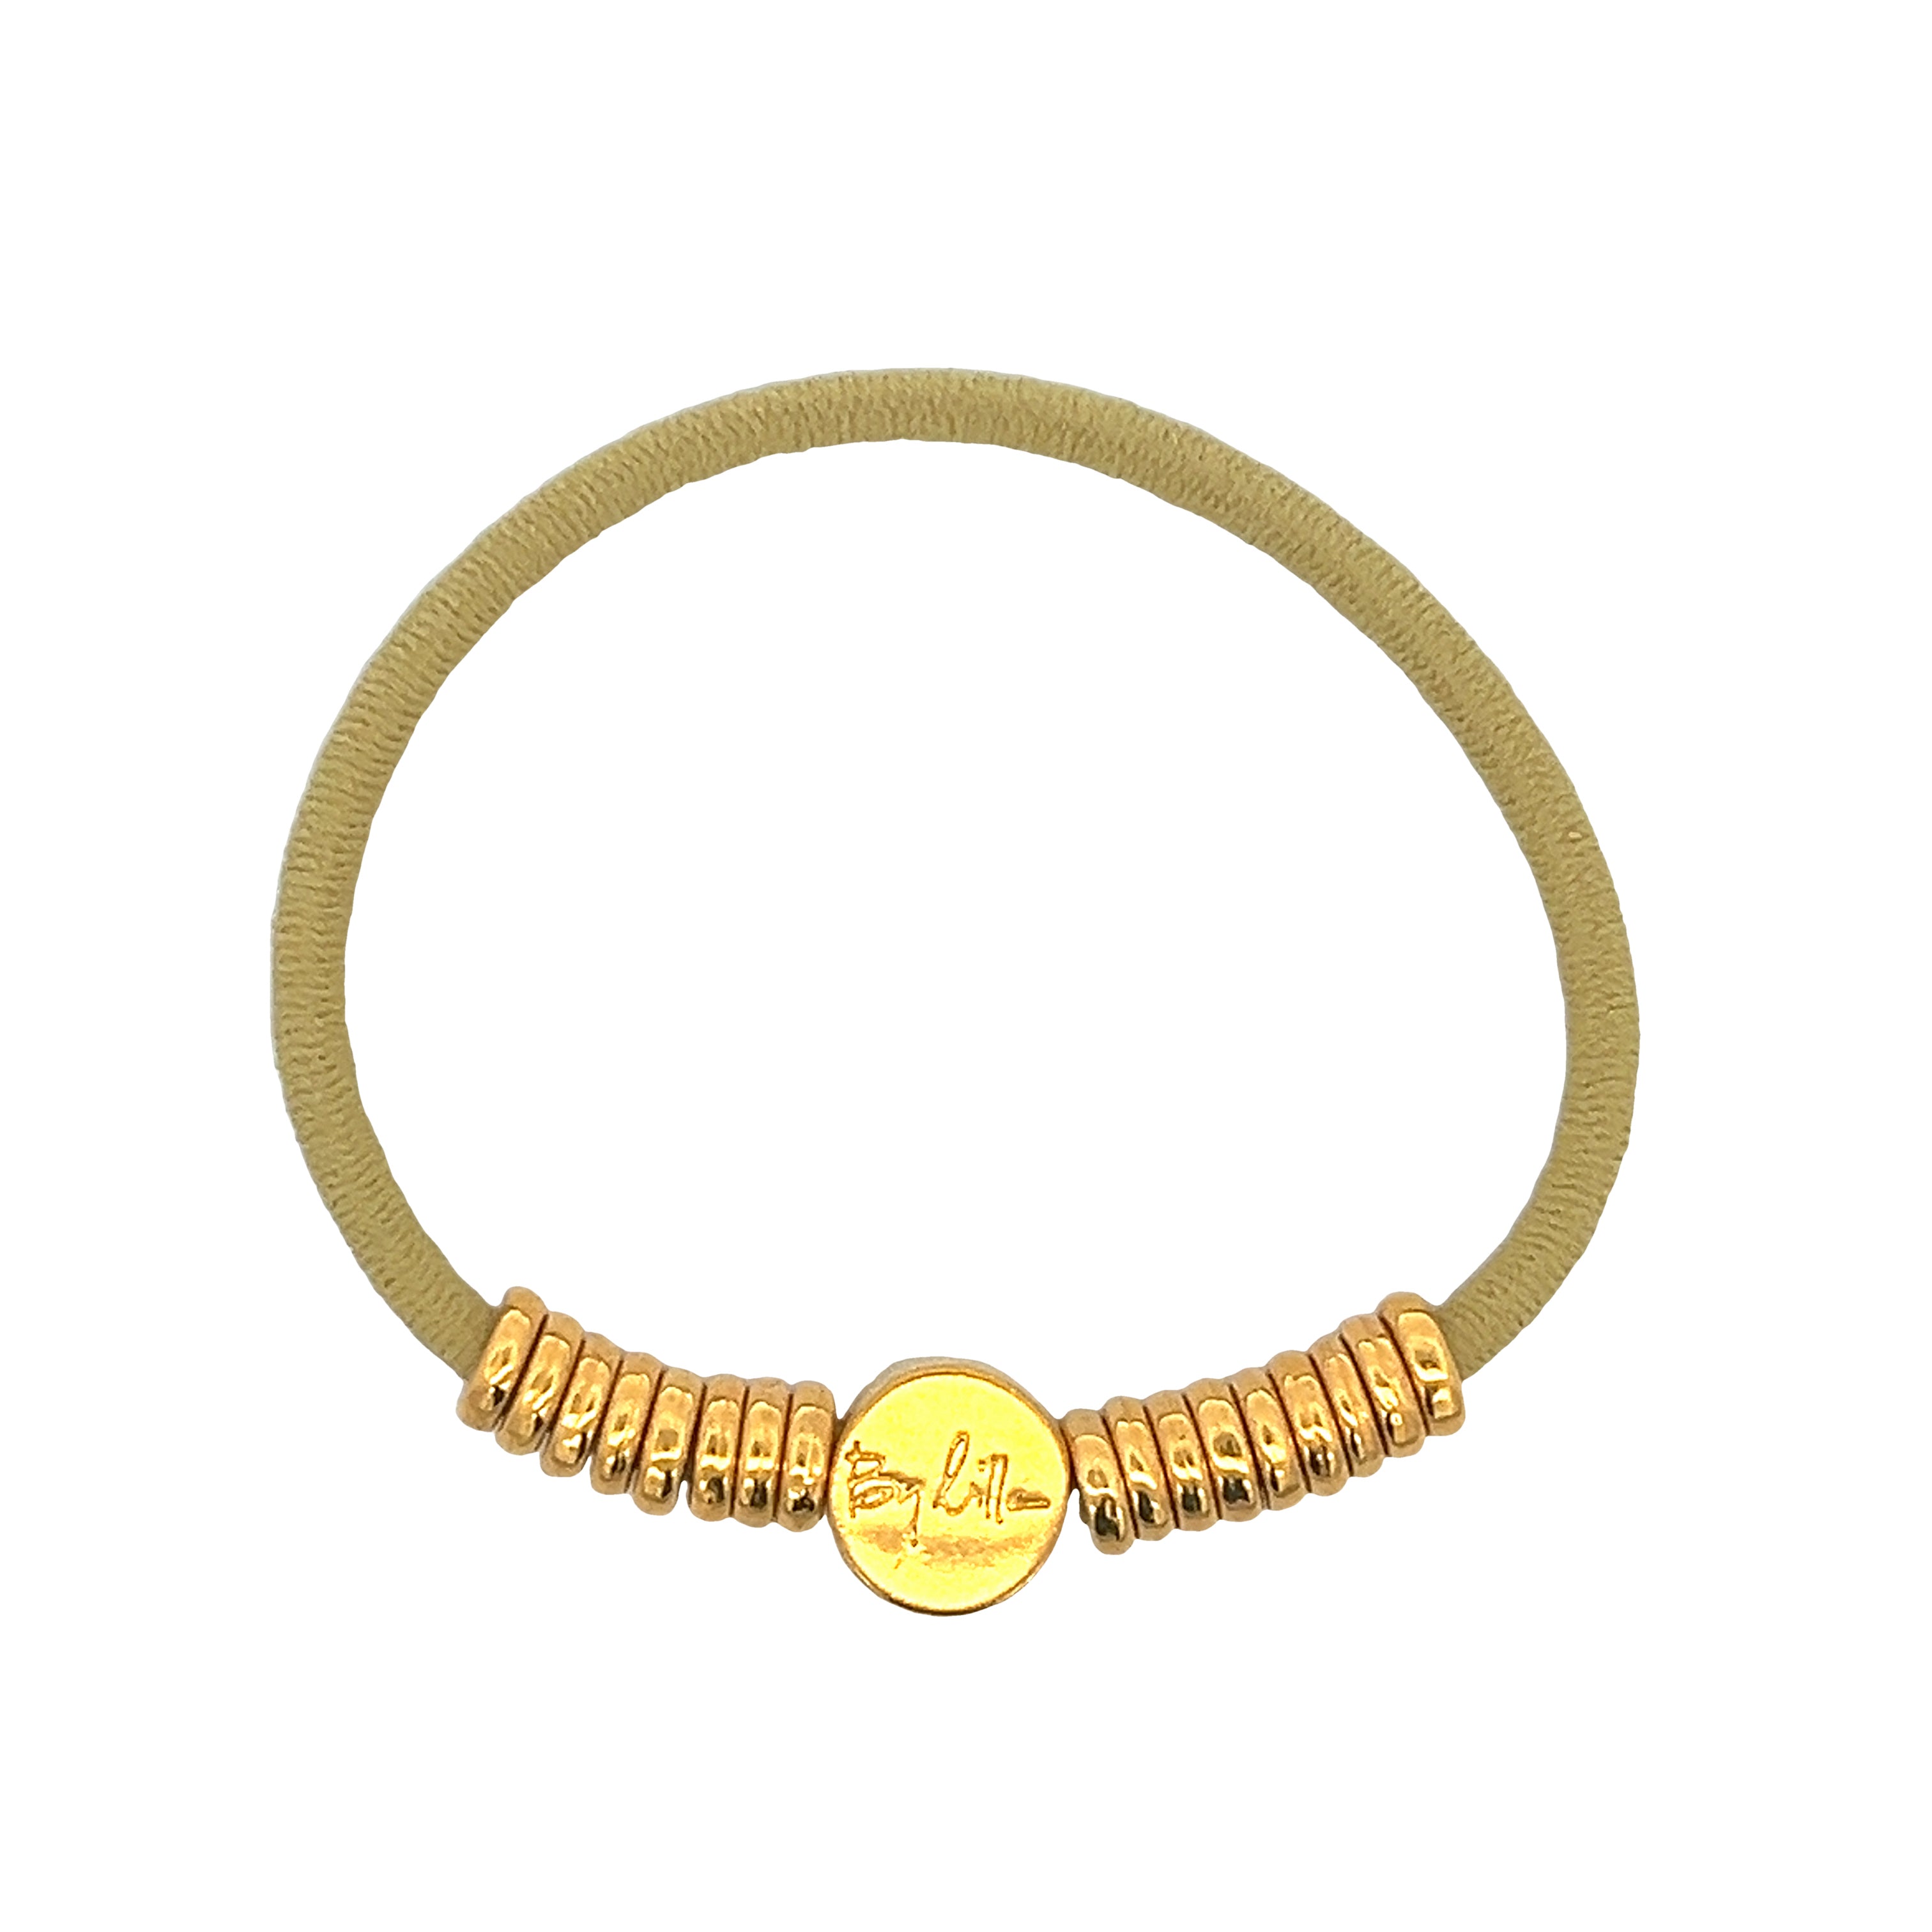 HAIR BRACELET AND HAIR TAIL WITH GOLDEN RINGS